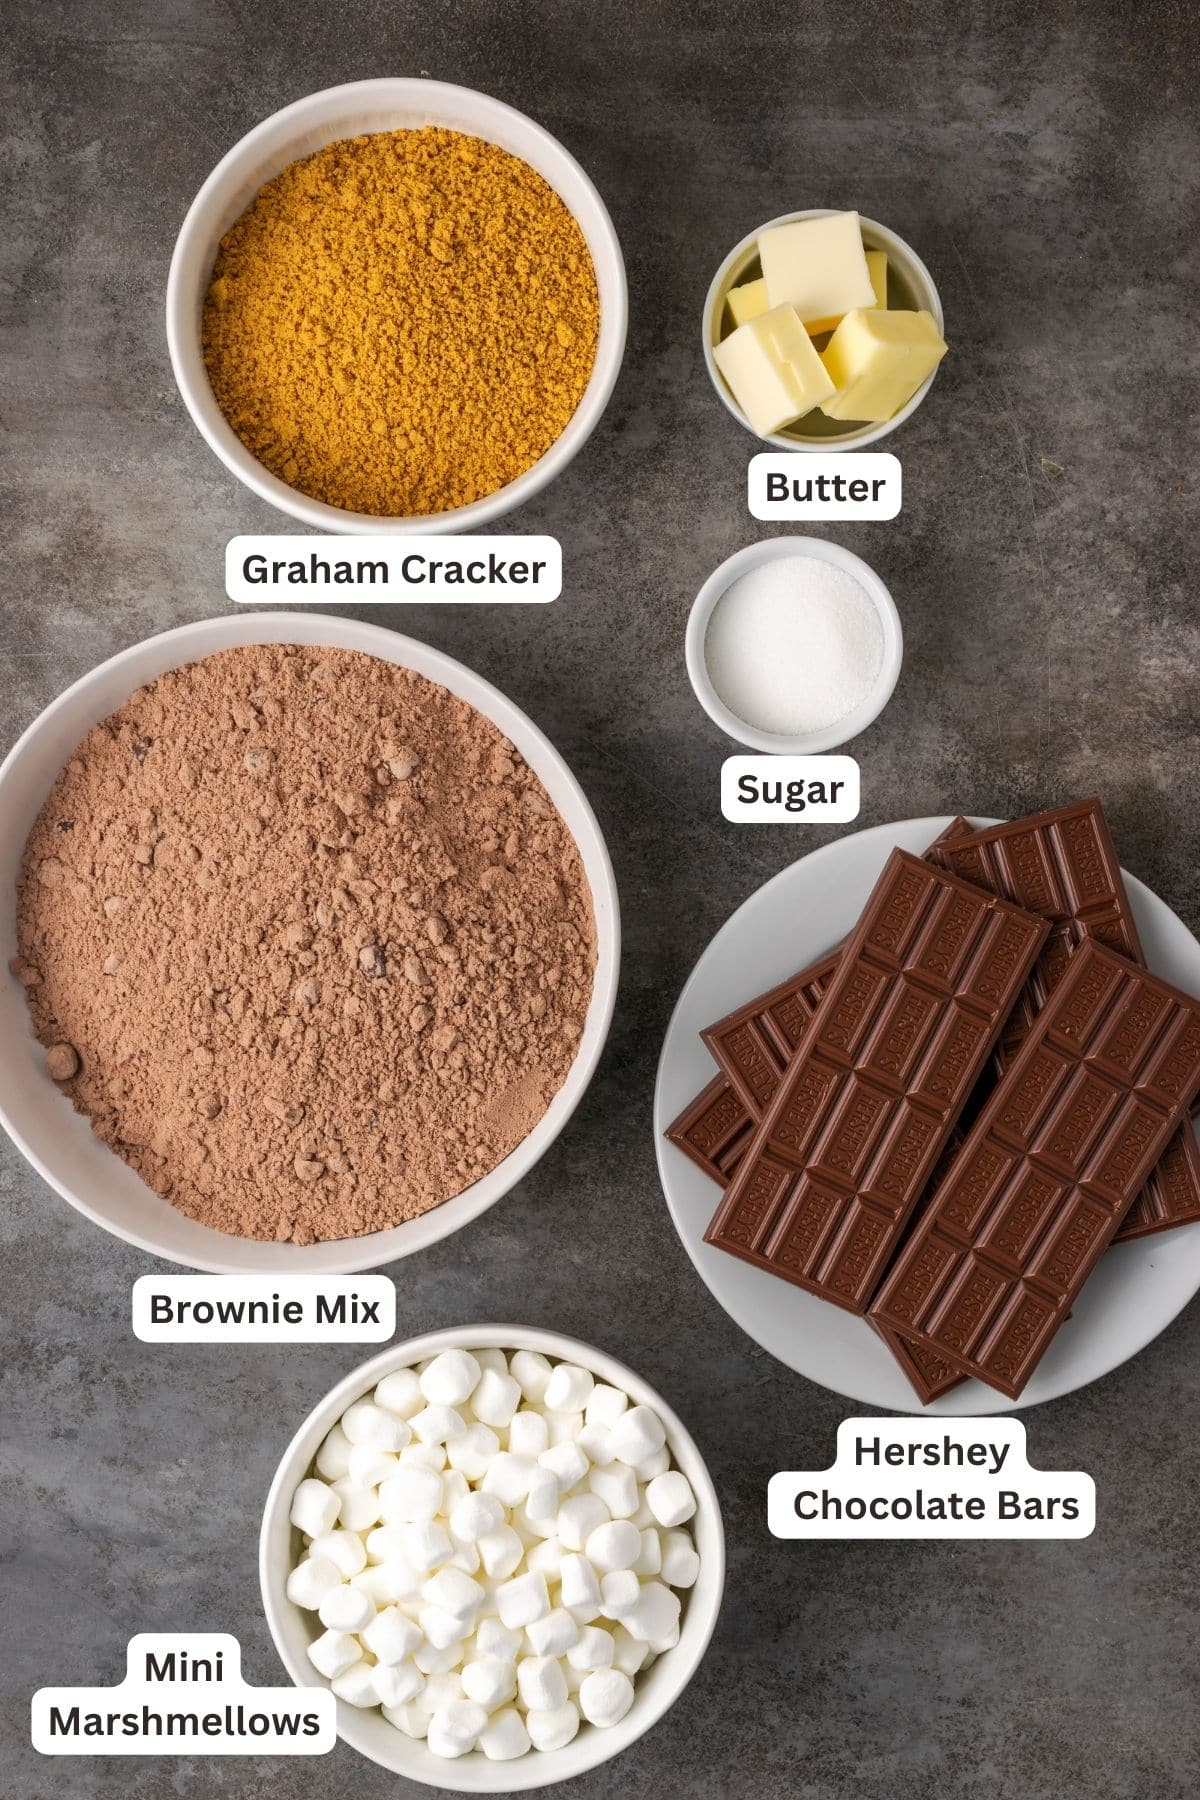 Ingredients for smores brownies with text labels overlaying each ingredient.